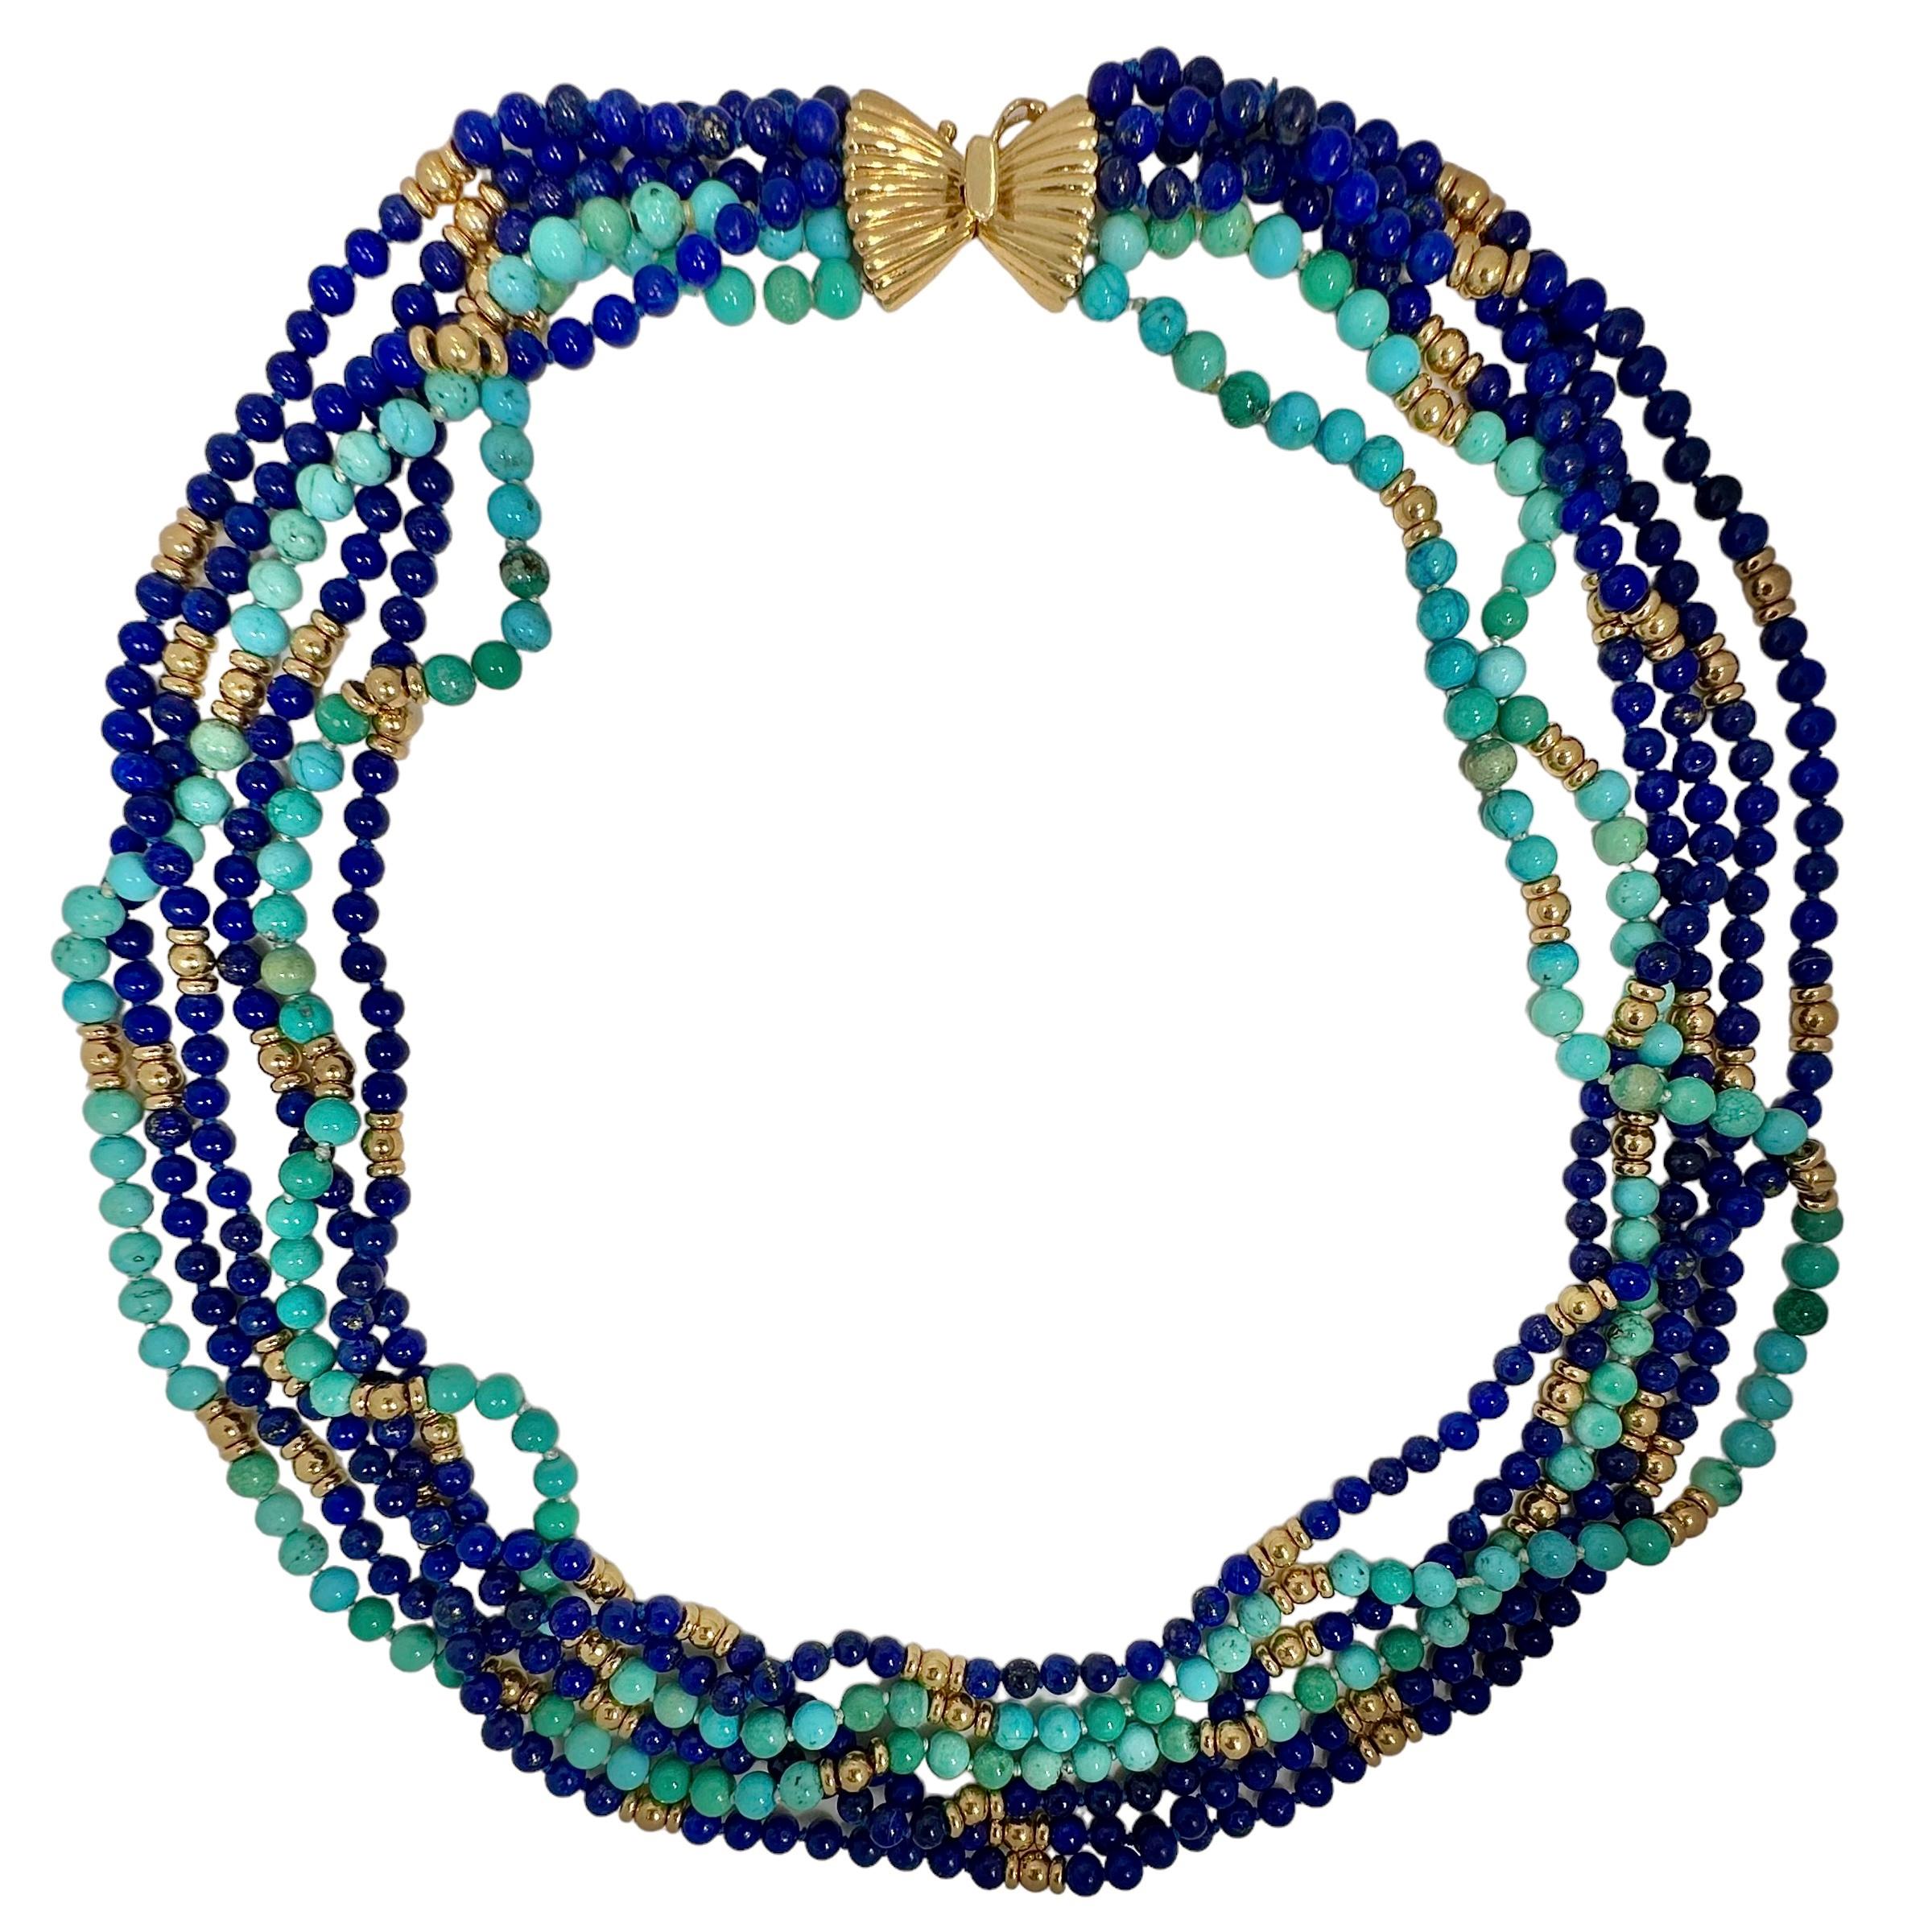 This Classic Mid-Century choker length torsade necklace is a true classic in style and in the materials used to fabricate it. Two 4.5mm, bright, natural turquoise strands are grouped with four 4mm, rich blue strands of lapis-lazuli. When worn as a